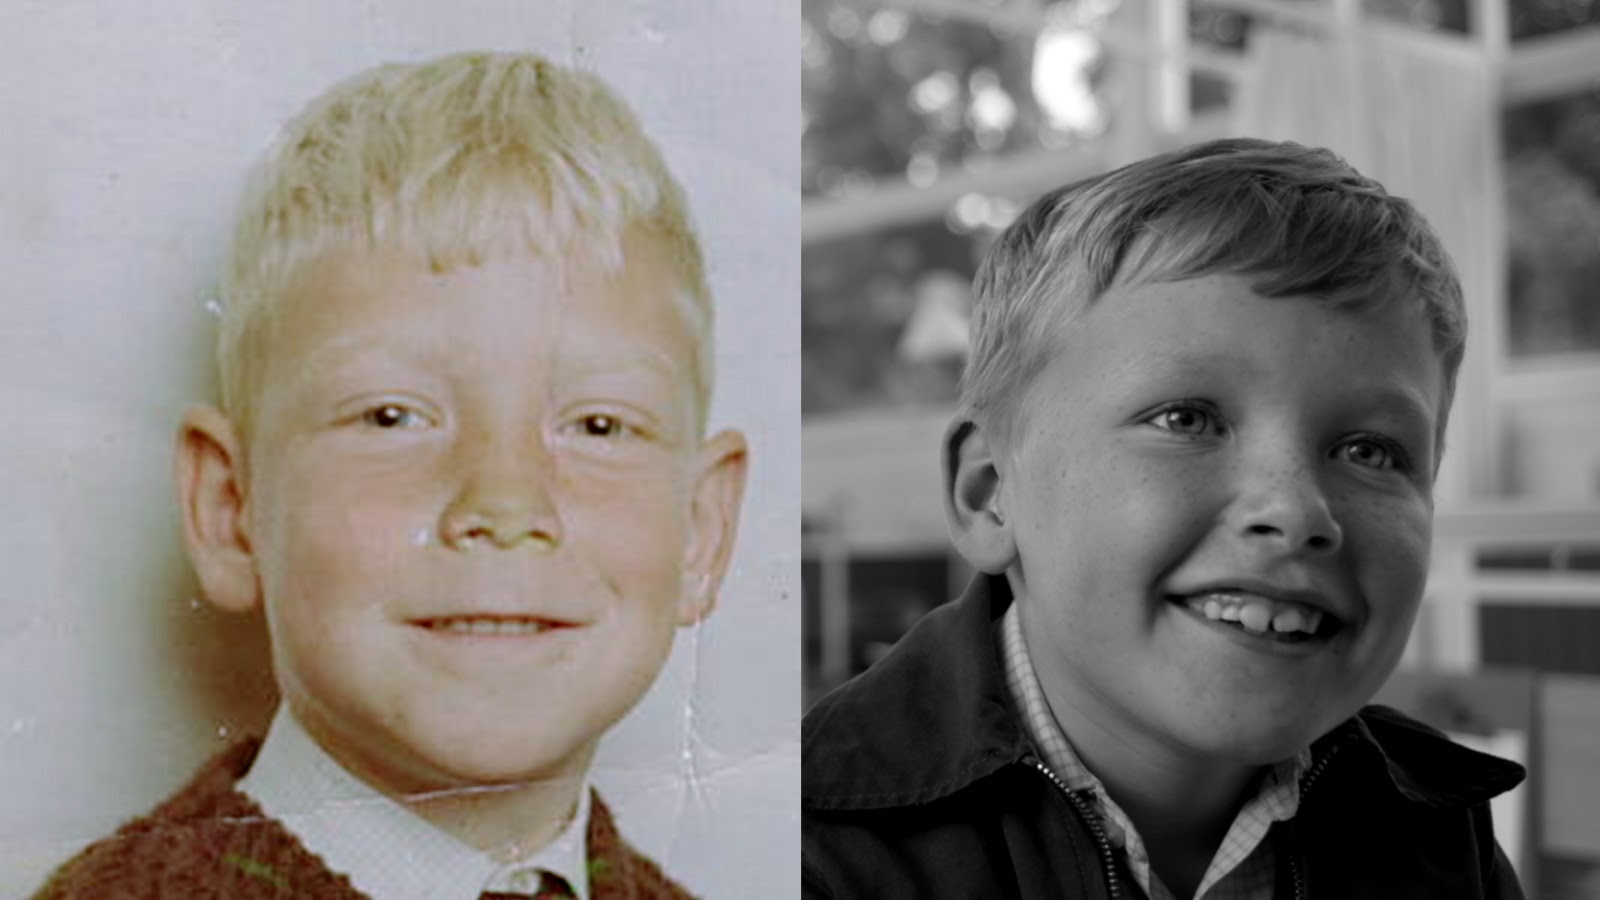 Kenneth Branagh as a child alongside Jude Hill, who plays Buddy in Belfast.